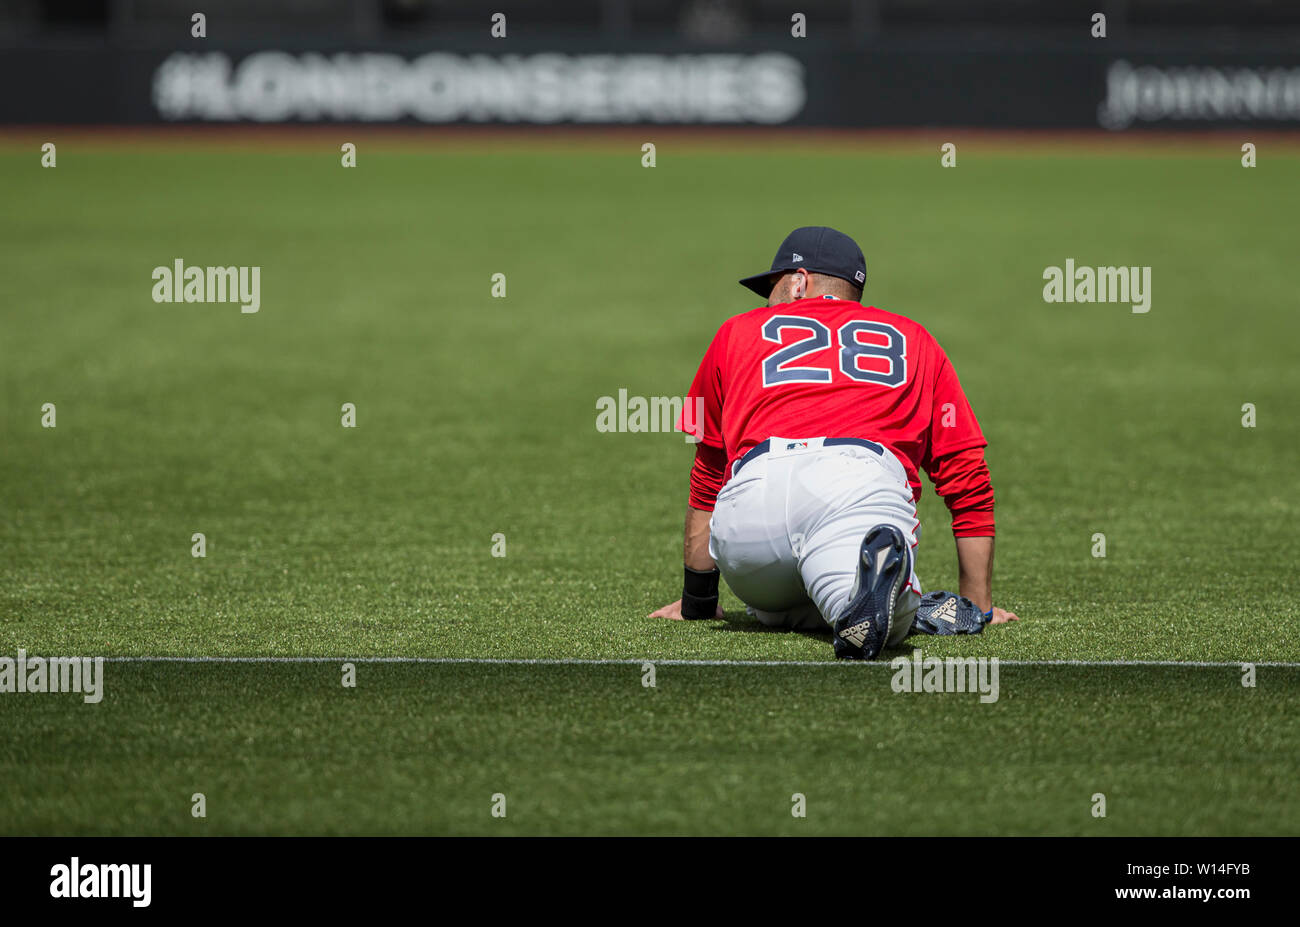 London Stadium, London, UK. 30th June, 2019. Mitel &amp; MLB Present London Series Baseball, Boston Red Sox versus New York Yankees; JD Martinez Outfield Right Field Player of the Boston Red Sox stretching on the field of play before the game Credit: Action Plus Sports/Alamy Live News Stock Photo